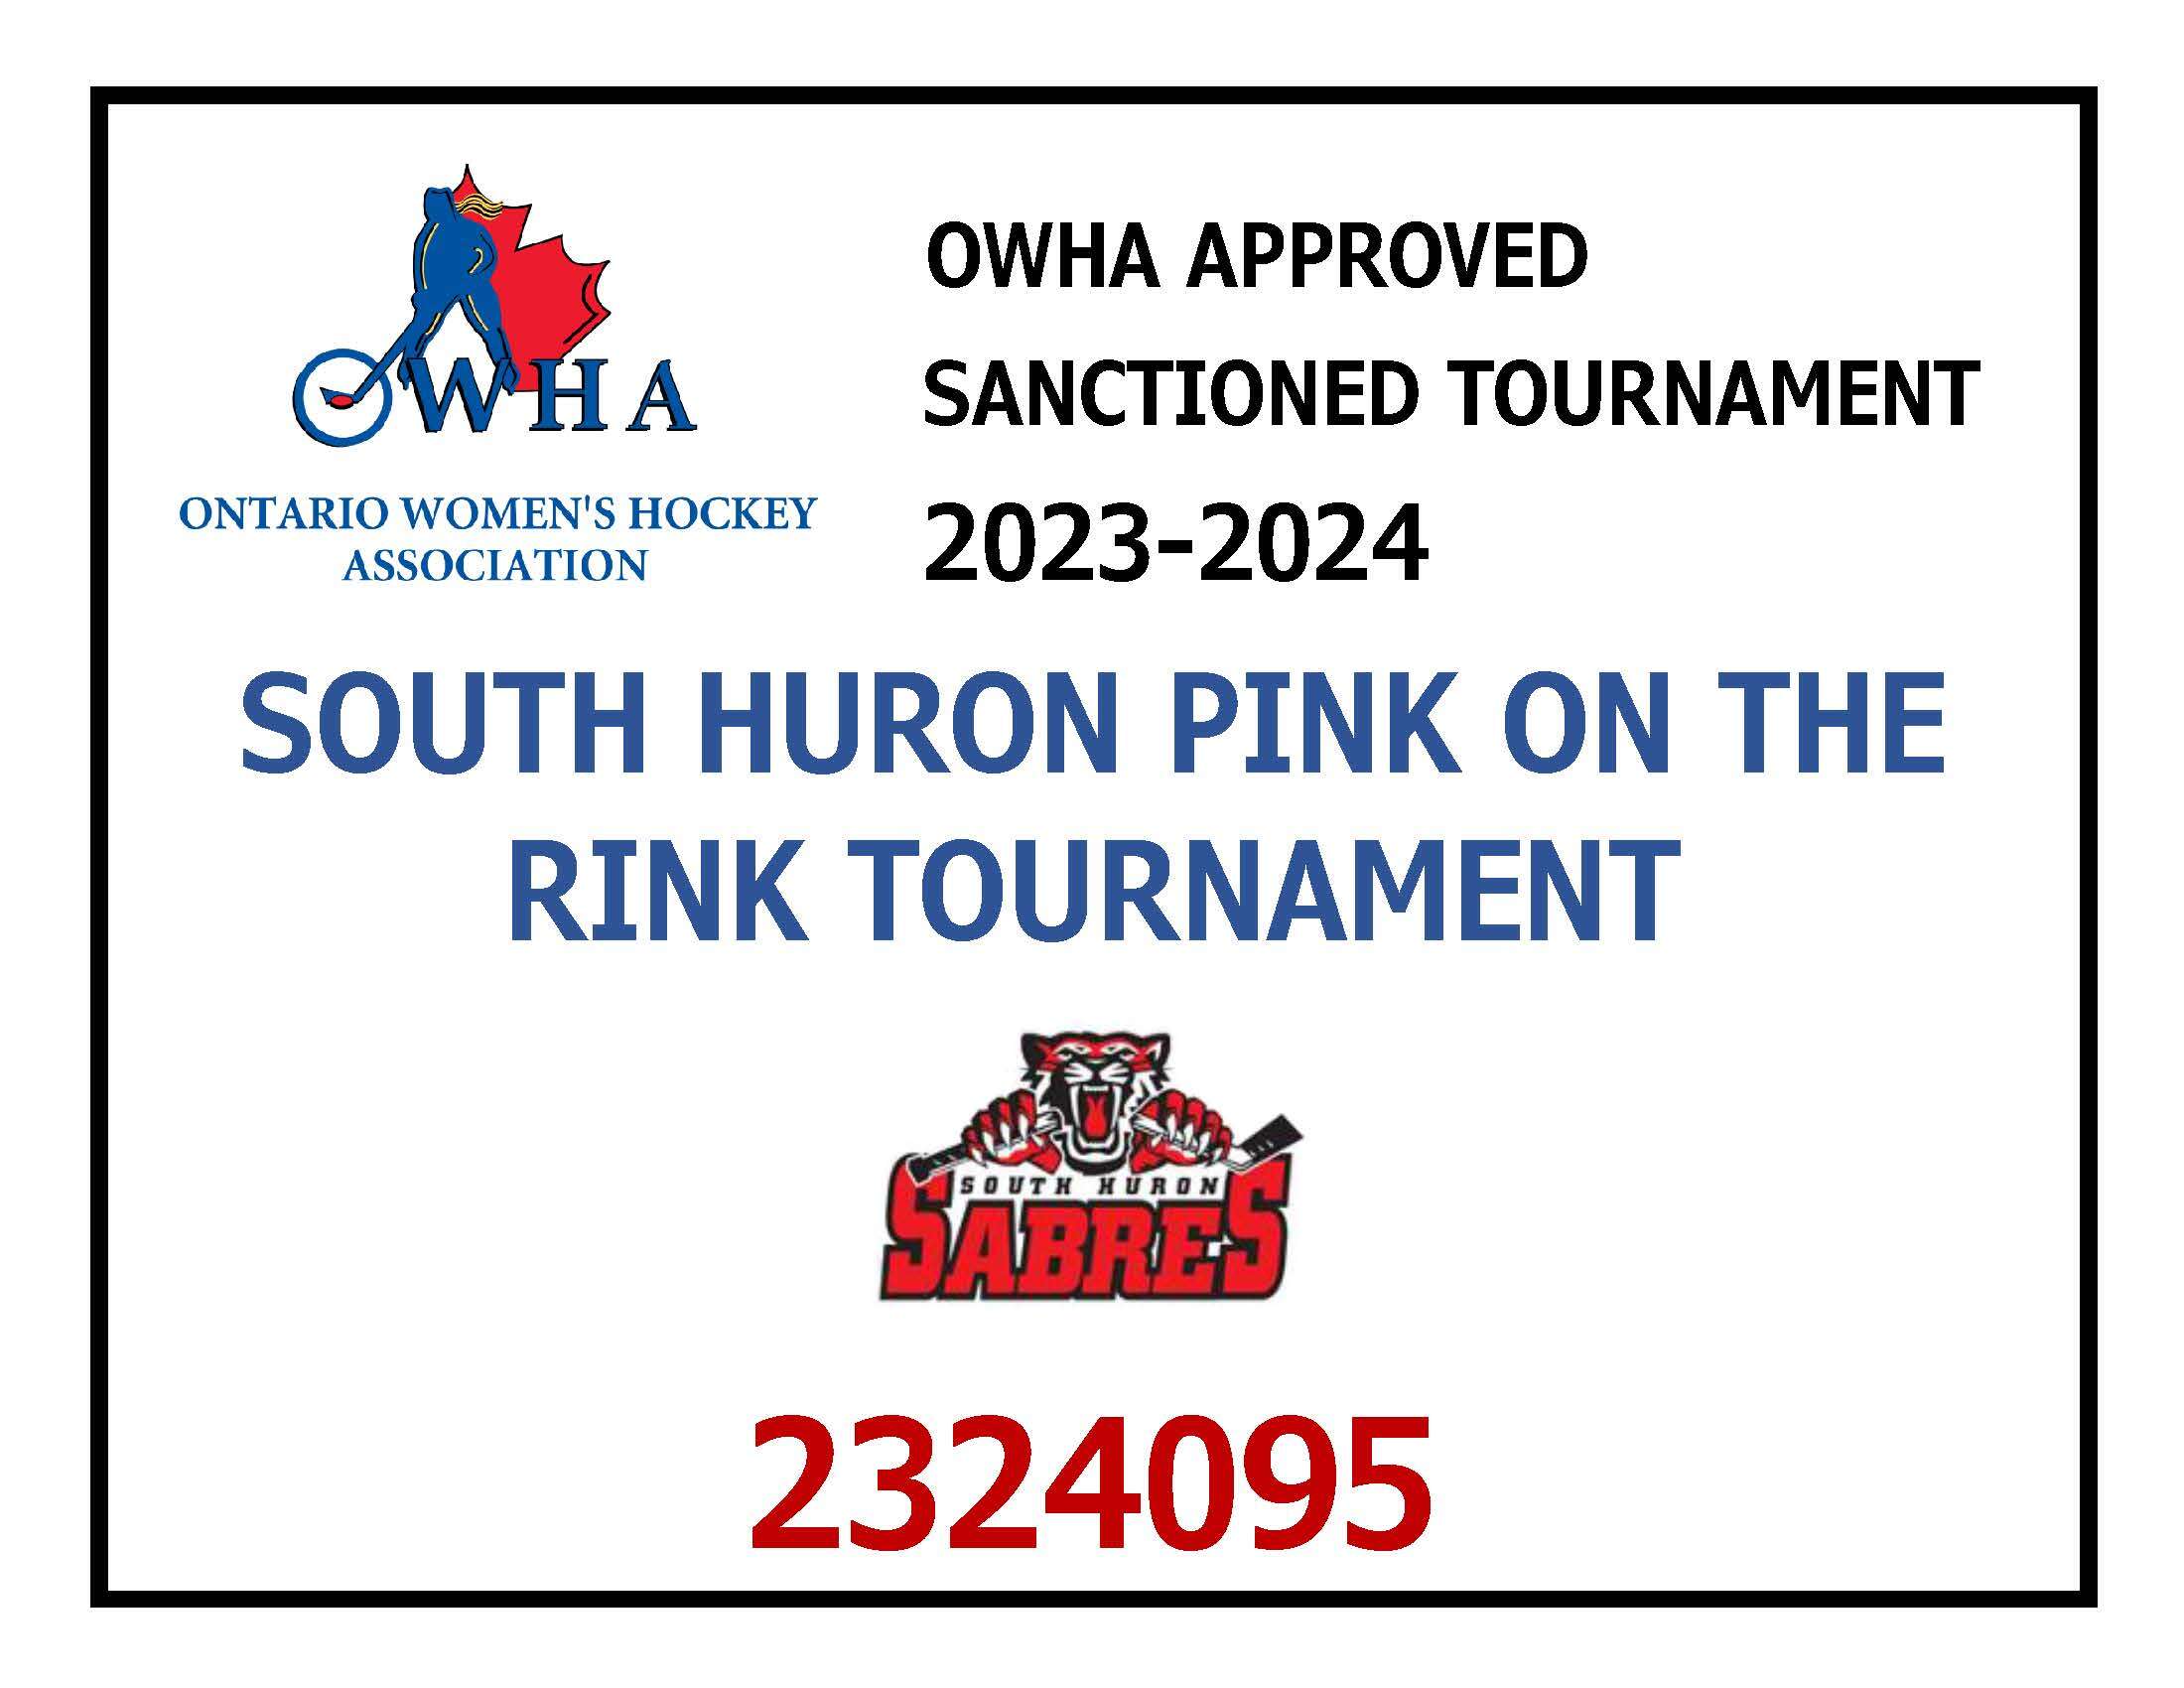 Permit_-_South_Huron_Pink_on_the_Rink_2023.jpg